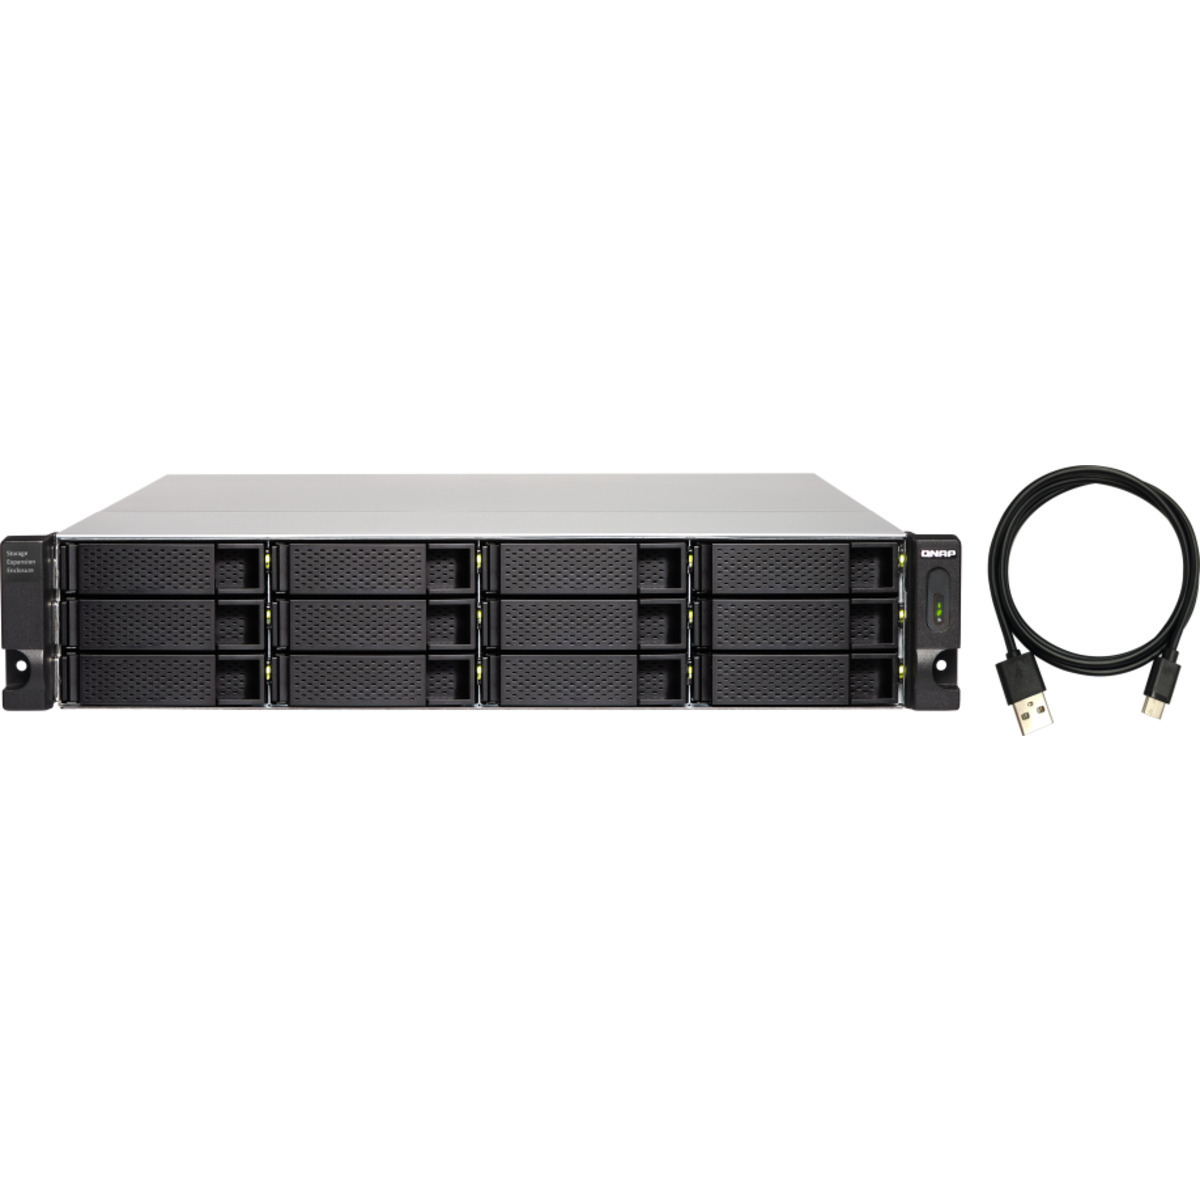 buy $7570 QNAP TL-R1200C-RP External Expansion Drive 264tb RackMount Expansion Enclosure 12x22000gb Seagate IronWolf Pro ST22000NT001 3.5 7200rpm SATA 6Gb/s HDD NAS Class Drives Installed - Burn-In Tested - nas headquarters buy network attached storage server device das new raid-5 free shipping simply usa TL-R1200C-RP External Expansion Drive